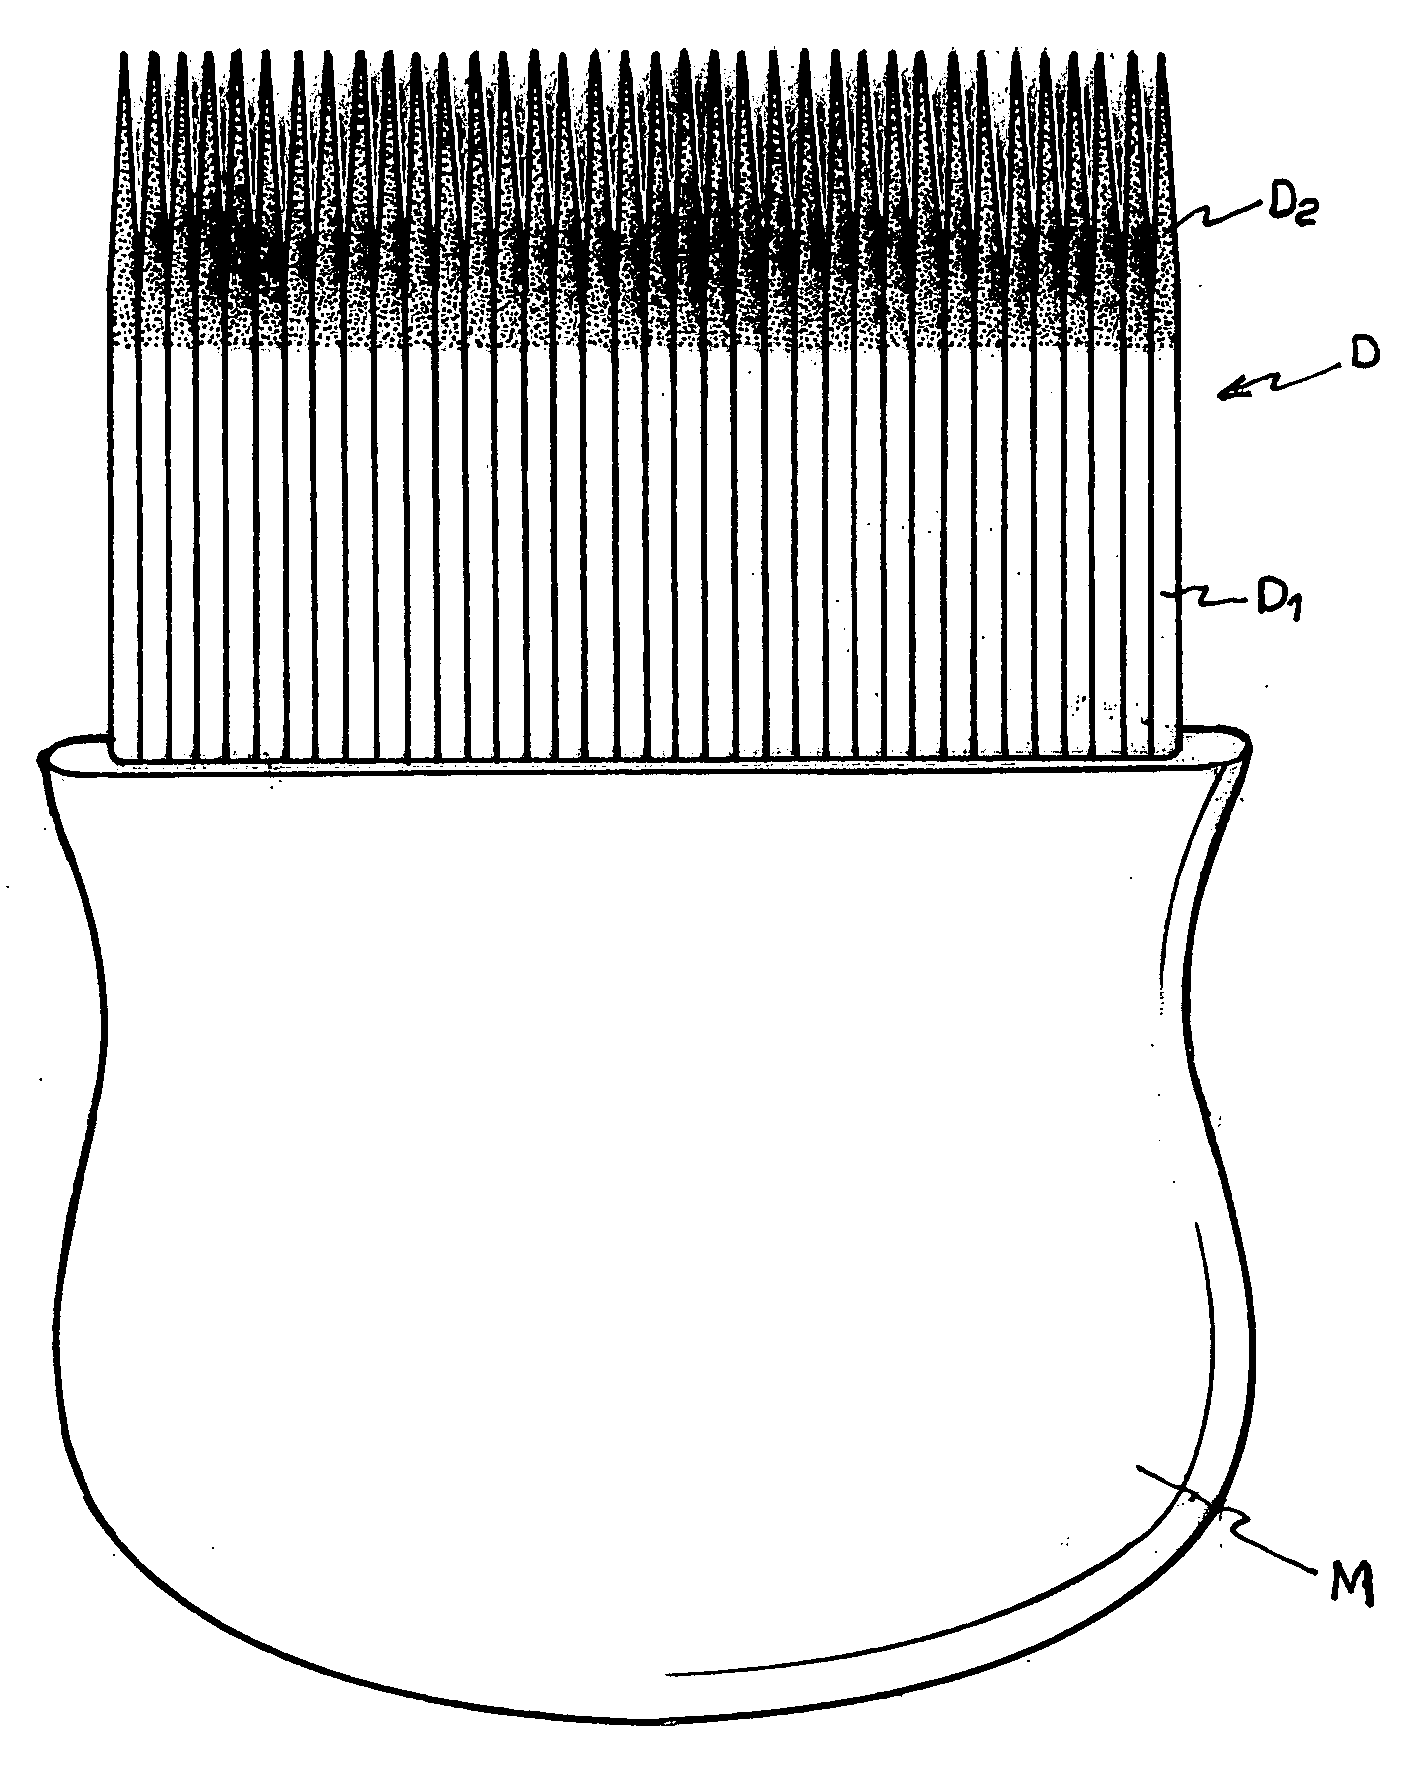 Rigid comb having microtexturized-tip teeth for hair cleaning